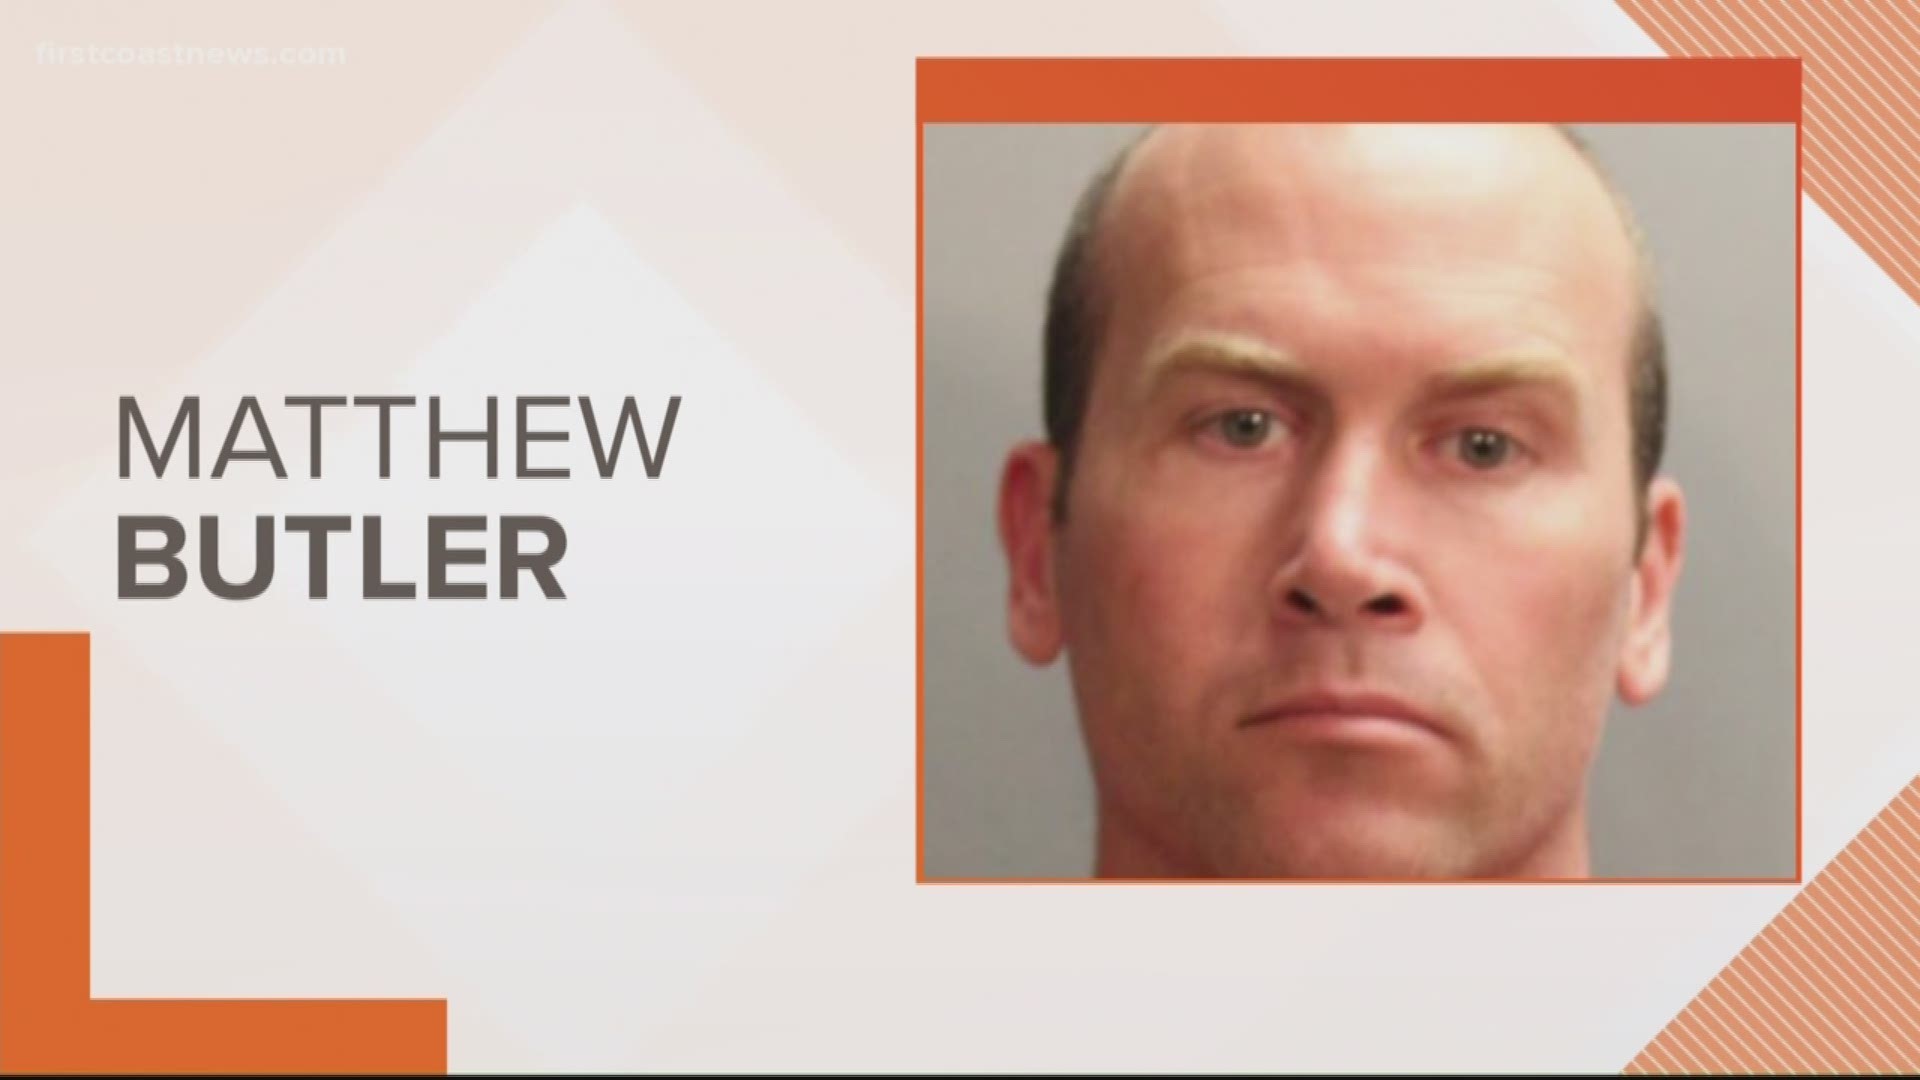 JSO says former Officer Matthew Butler was initially under investigation Friday, March 22 after he was allegedly in possession of a nude photograph of a young girl.